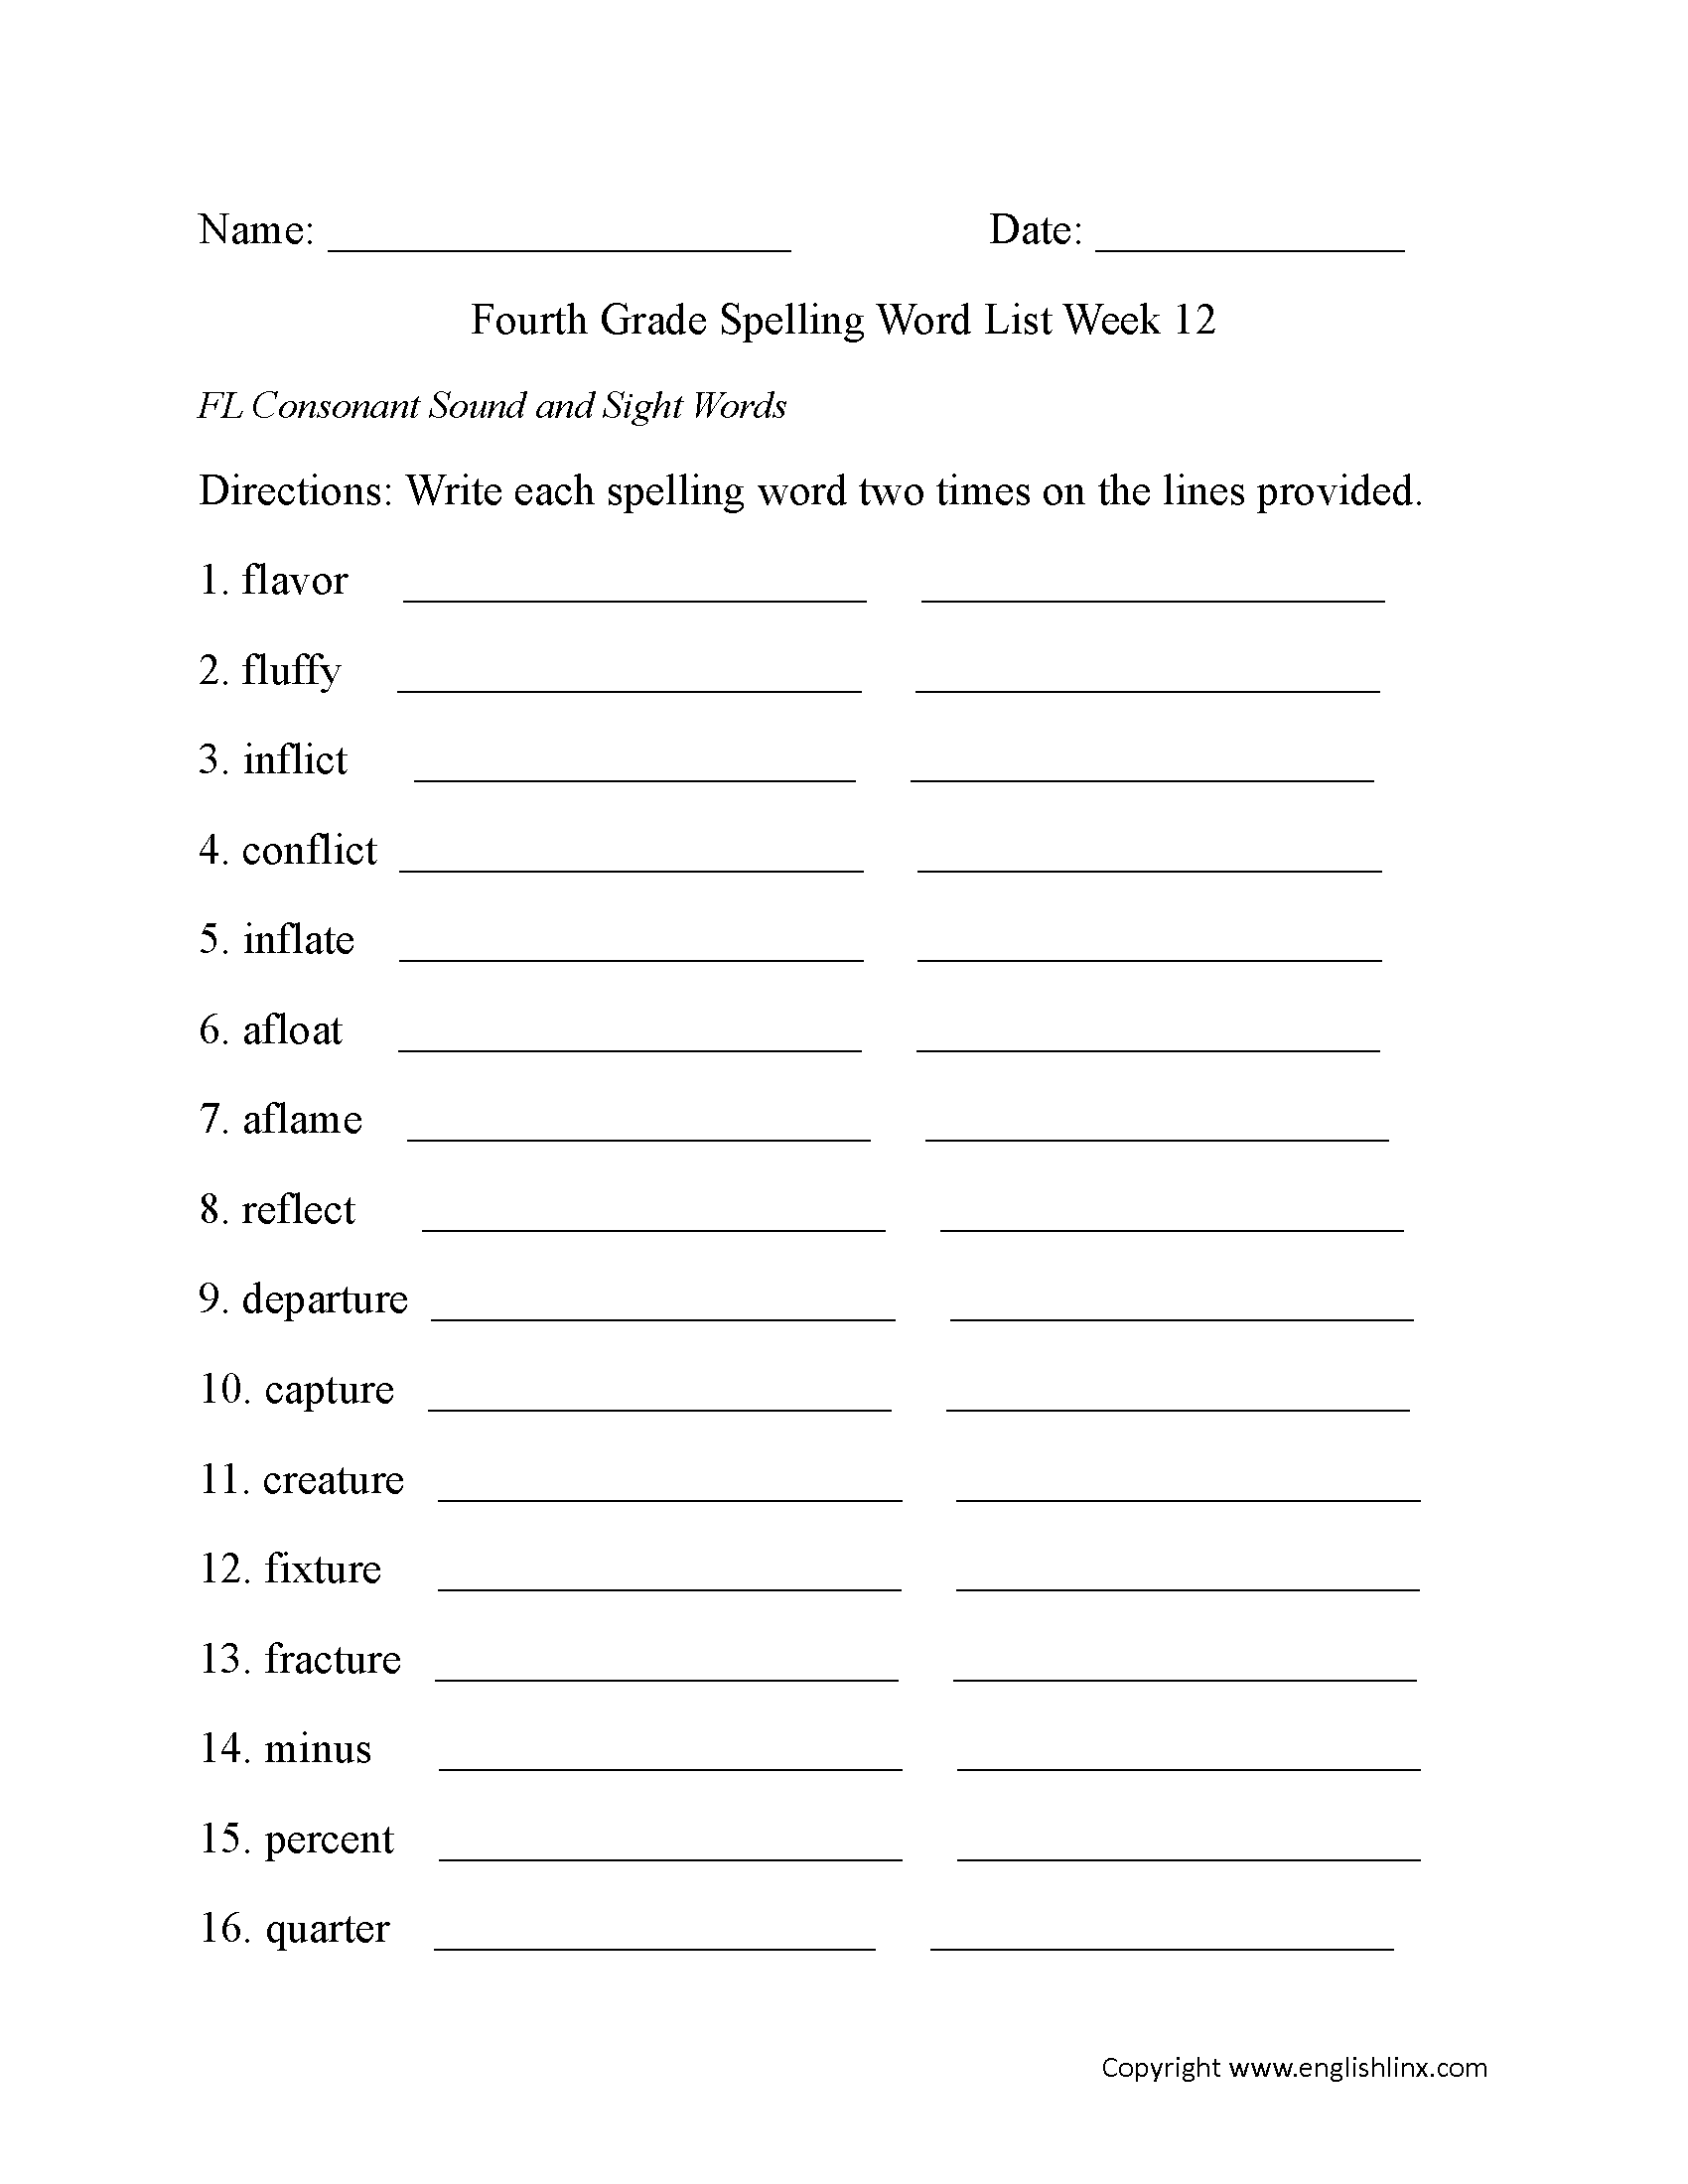 Week 12 FL Consonant and Sight Words Fourth Grade Spelling Words Worksheets